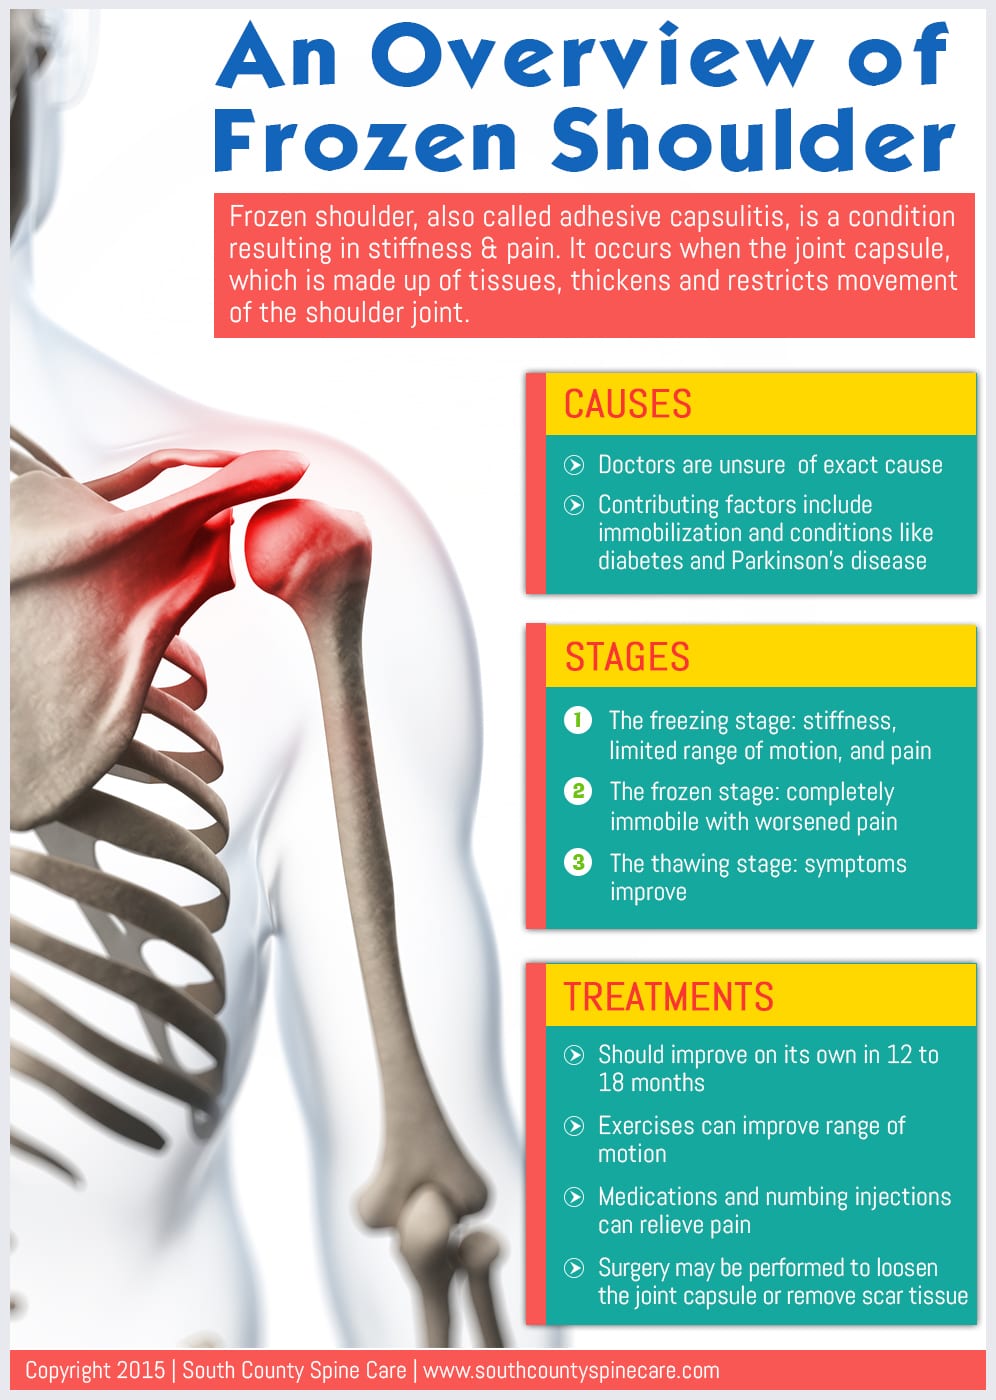 An Overview of Frozen Shoulder - South County Spine Care